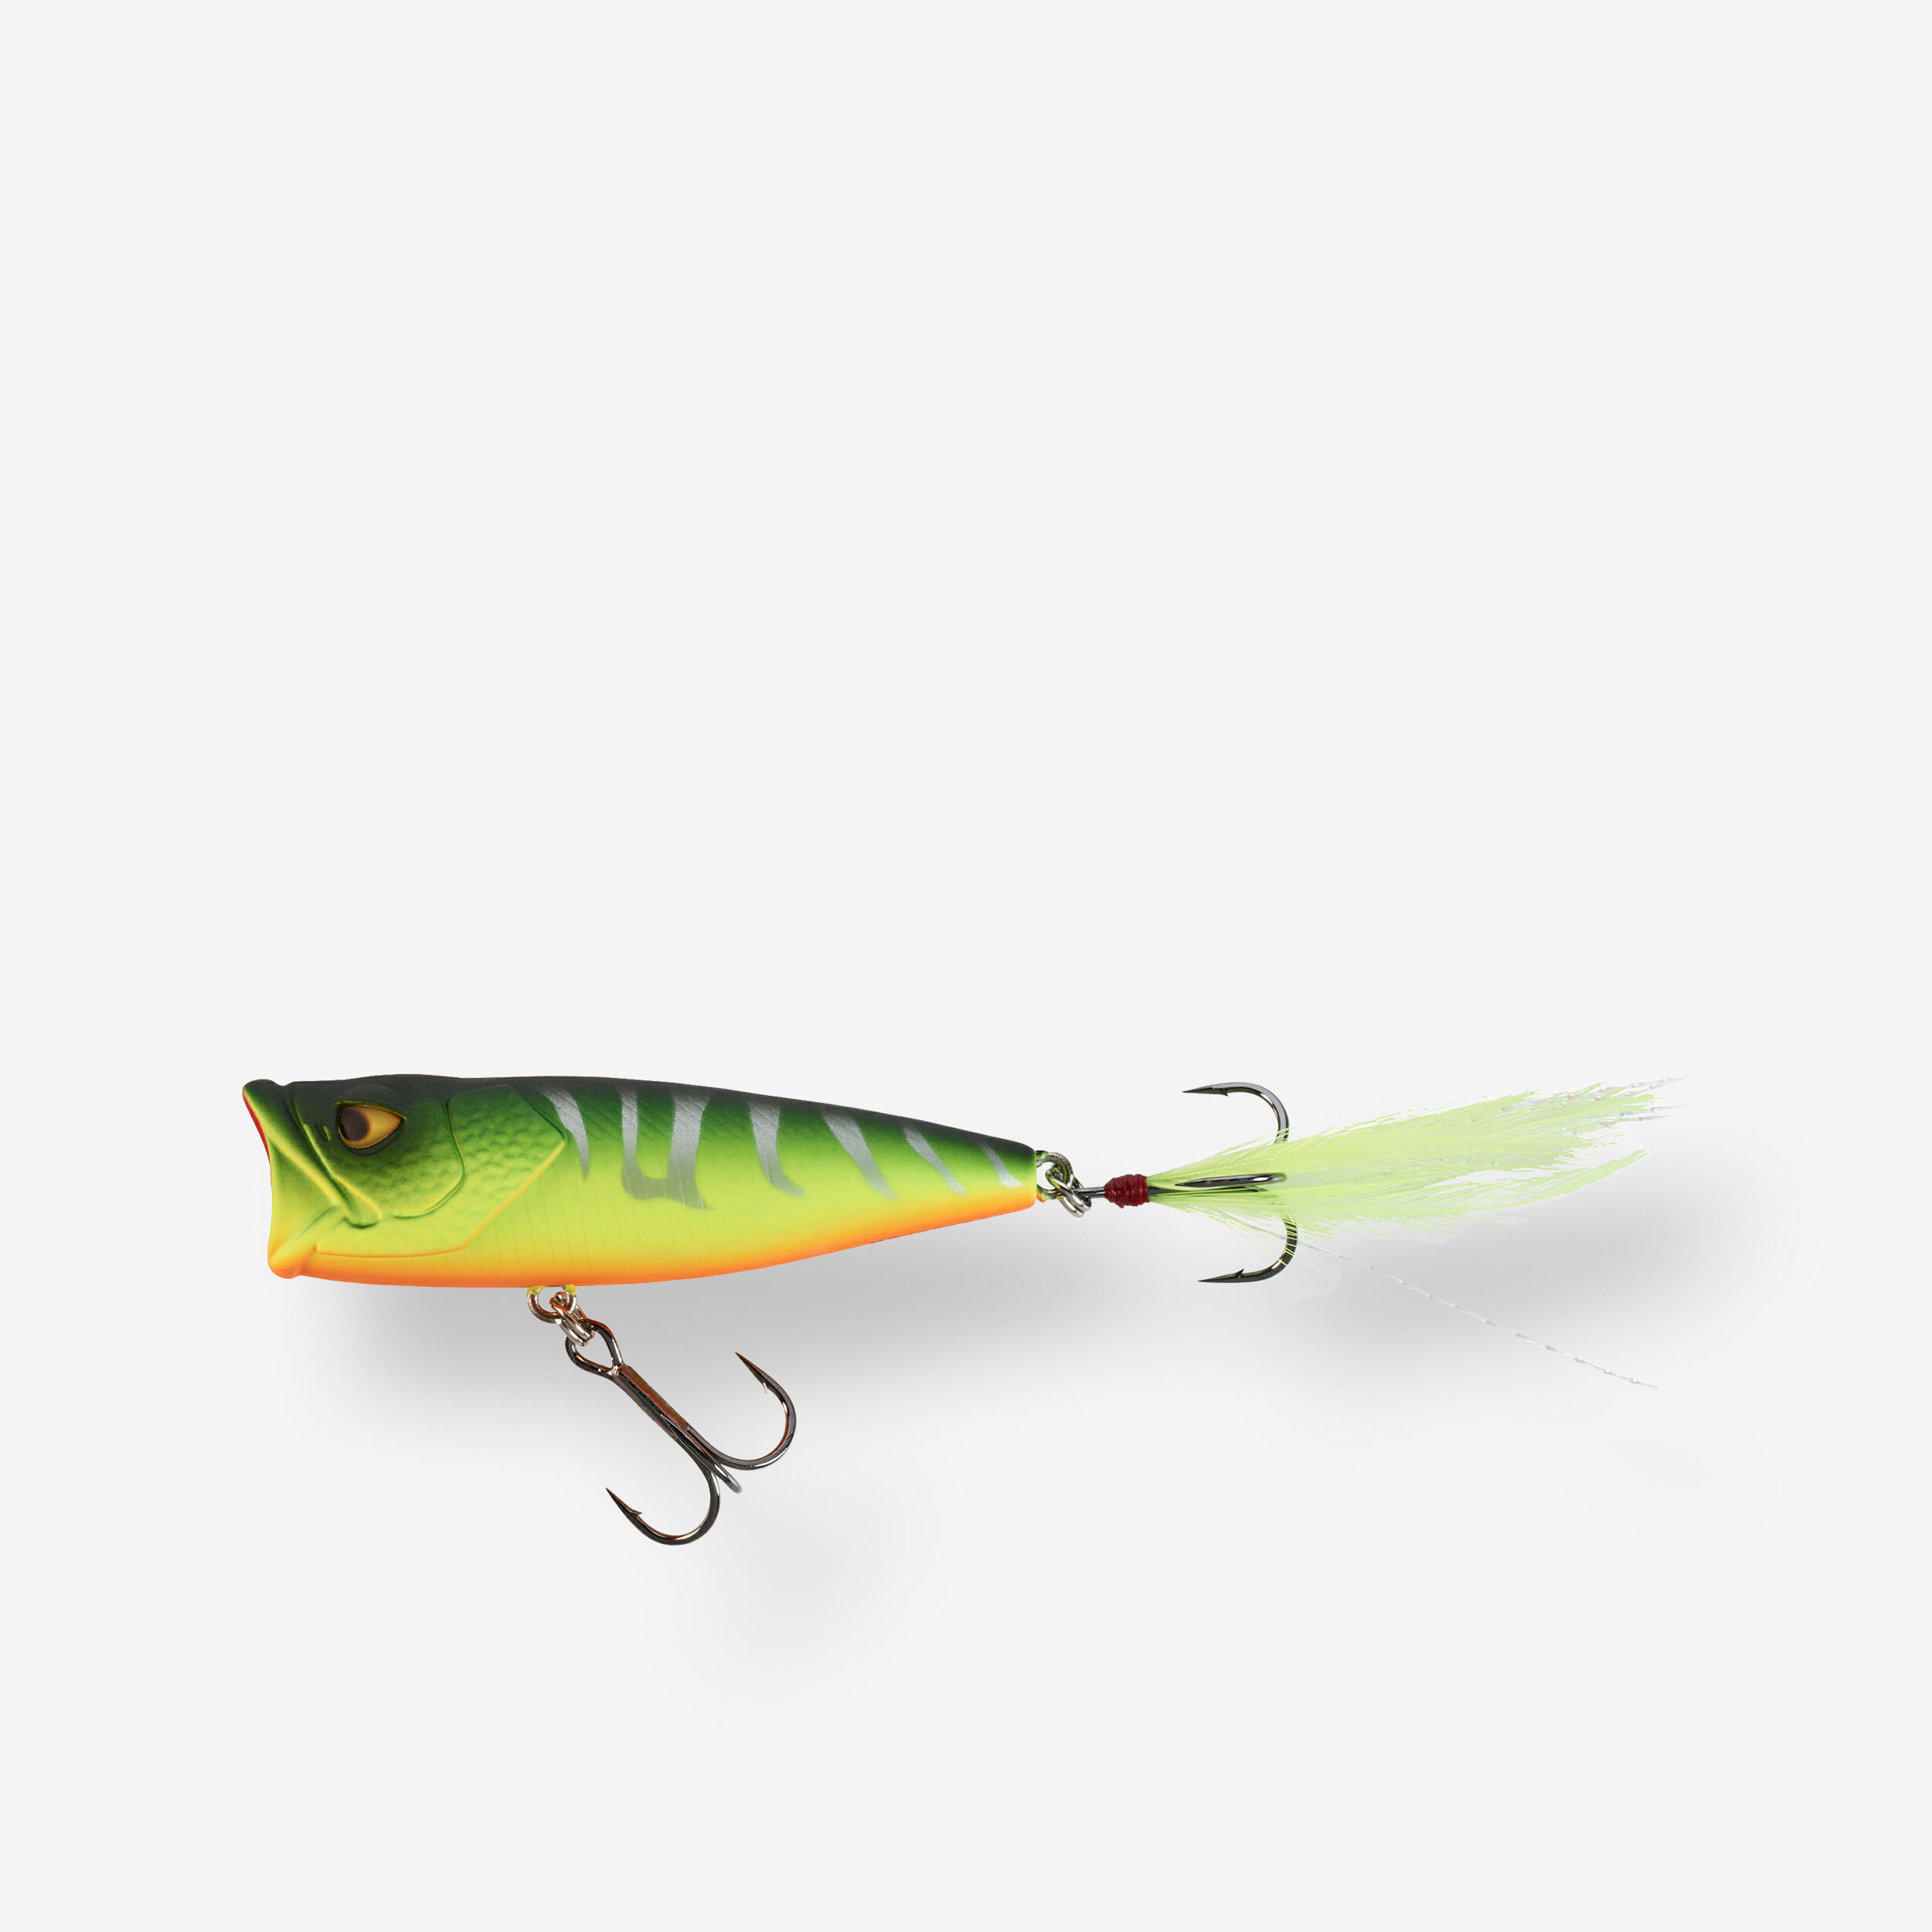 Up To 43% Off on 10PCS Fishing Lures Bait Spin